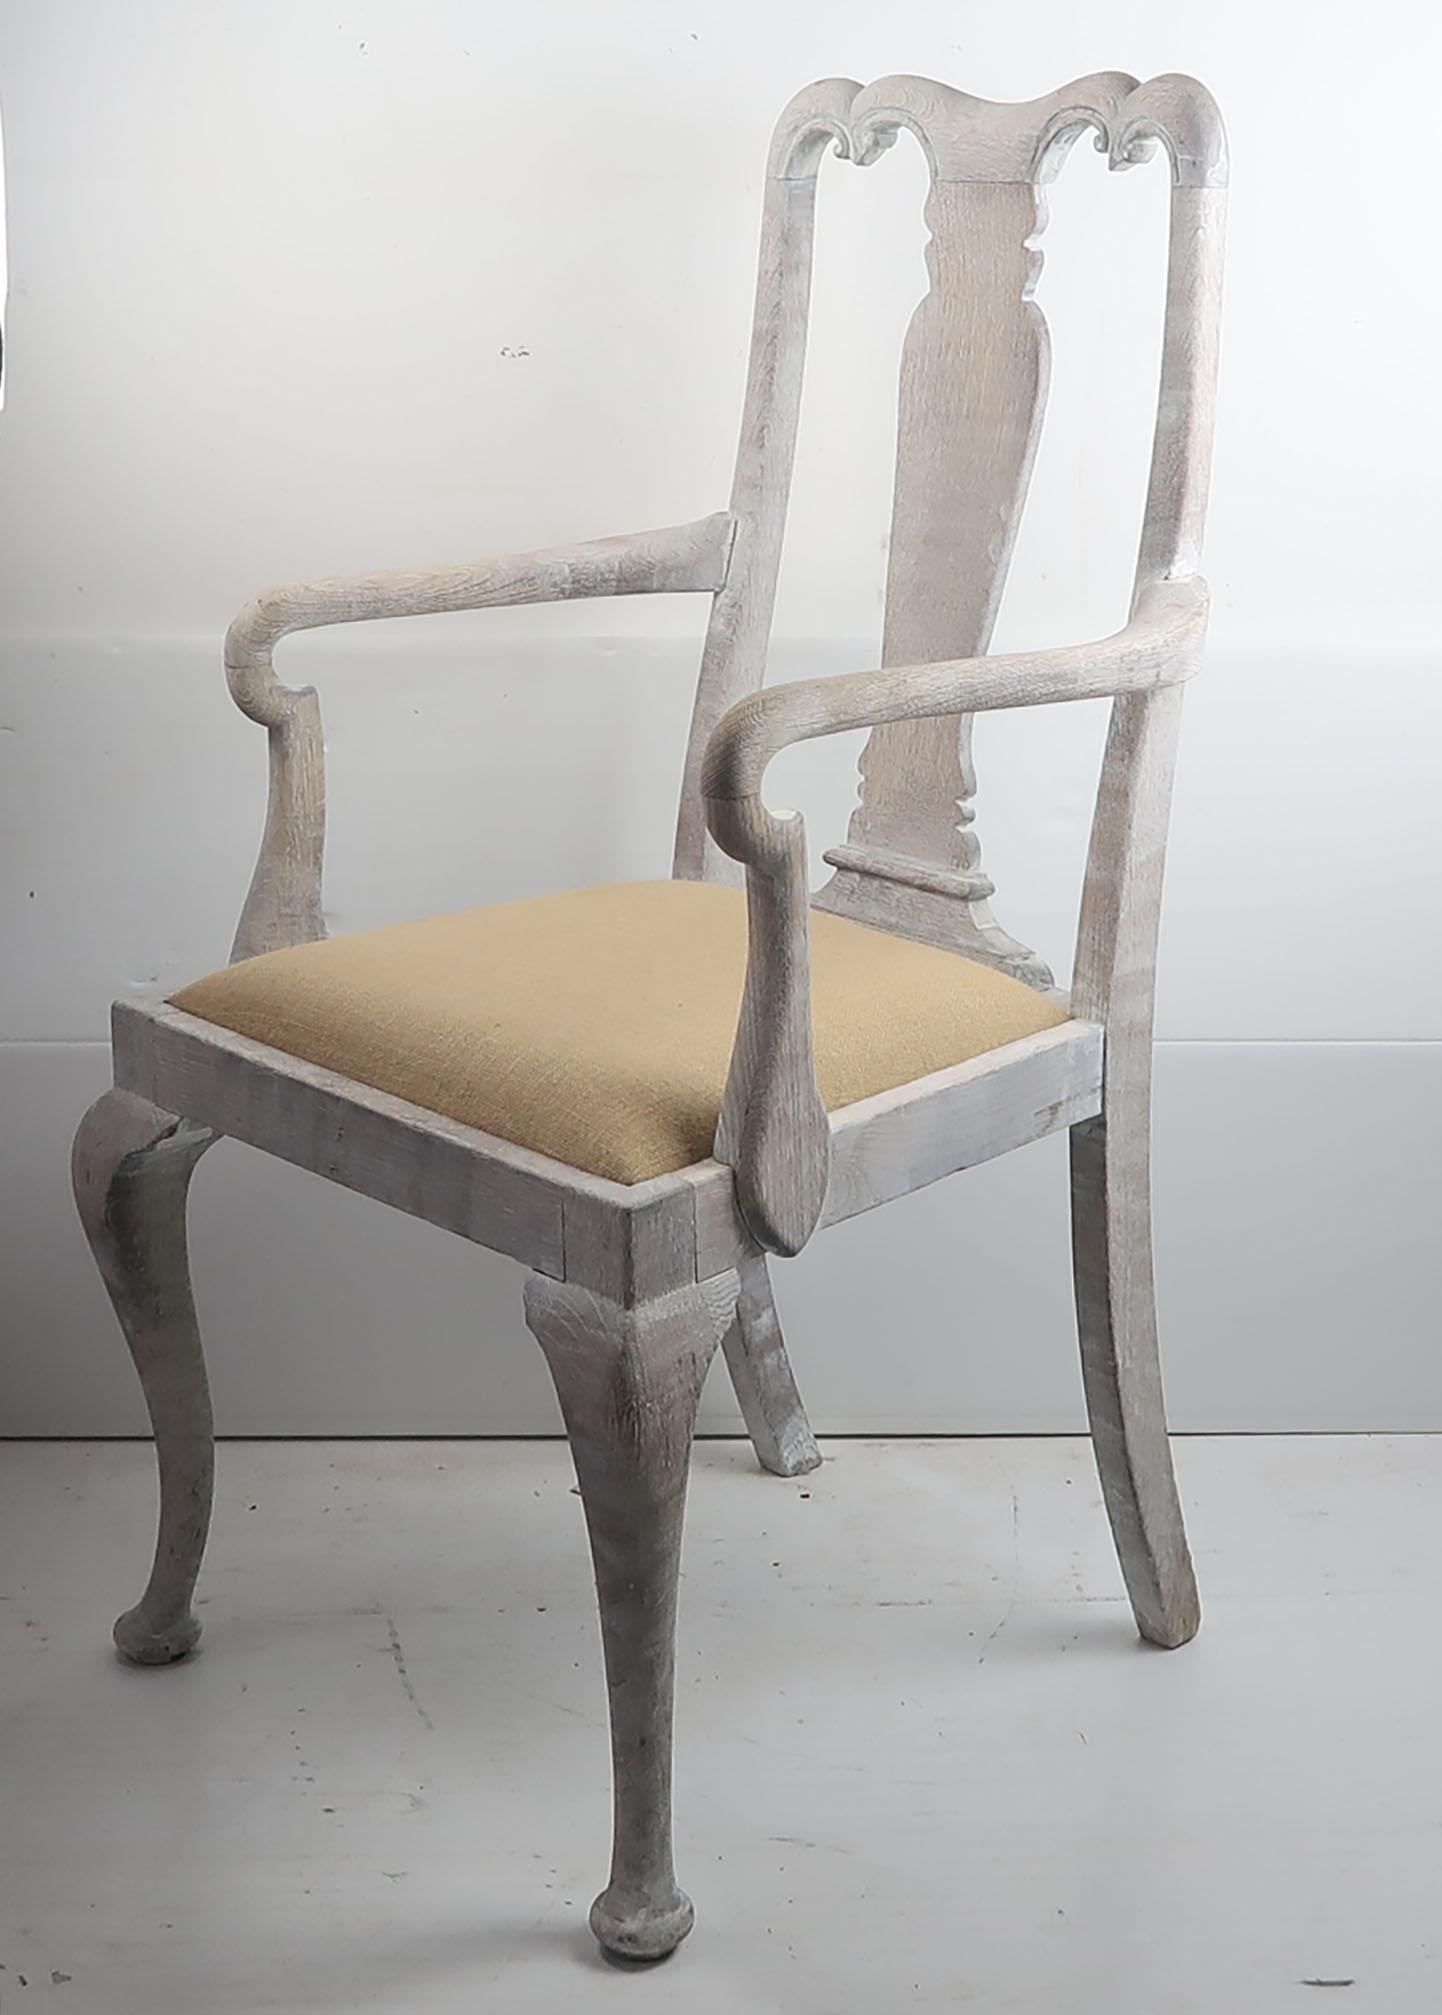 An elegant Gustavian style carver or armchair

A lovely urn shaped splat, cabriole leg and scroll detail to the top rail

It has been recently limed to enhance the beautiful grain in the wood.

The seat has been re-upholstered in hessian or